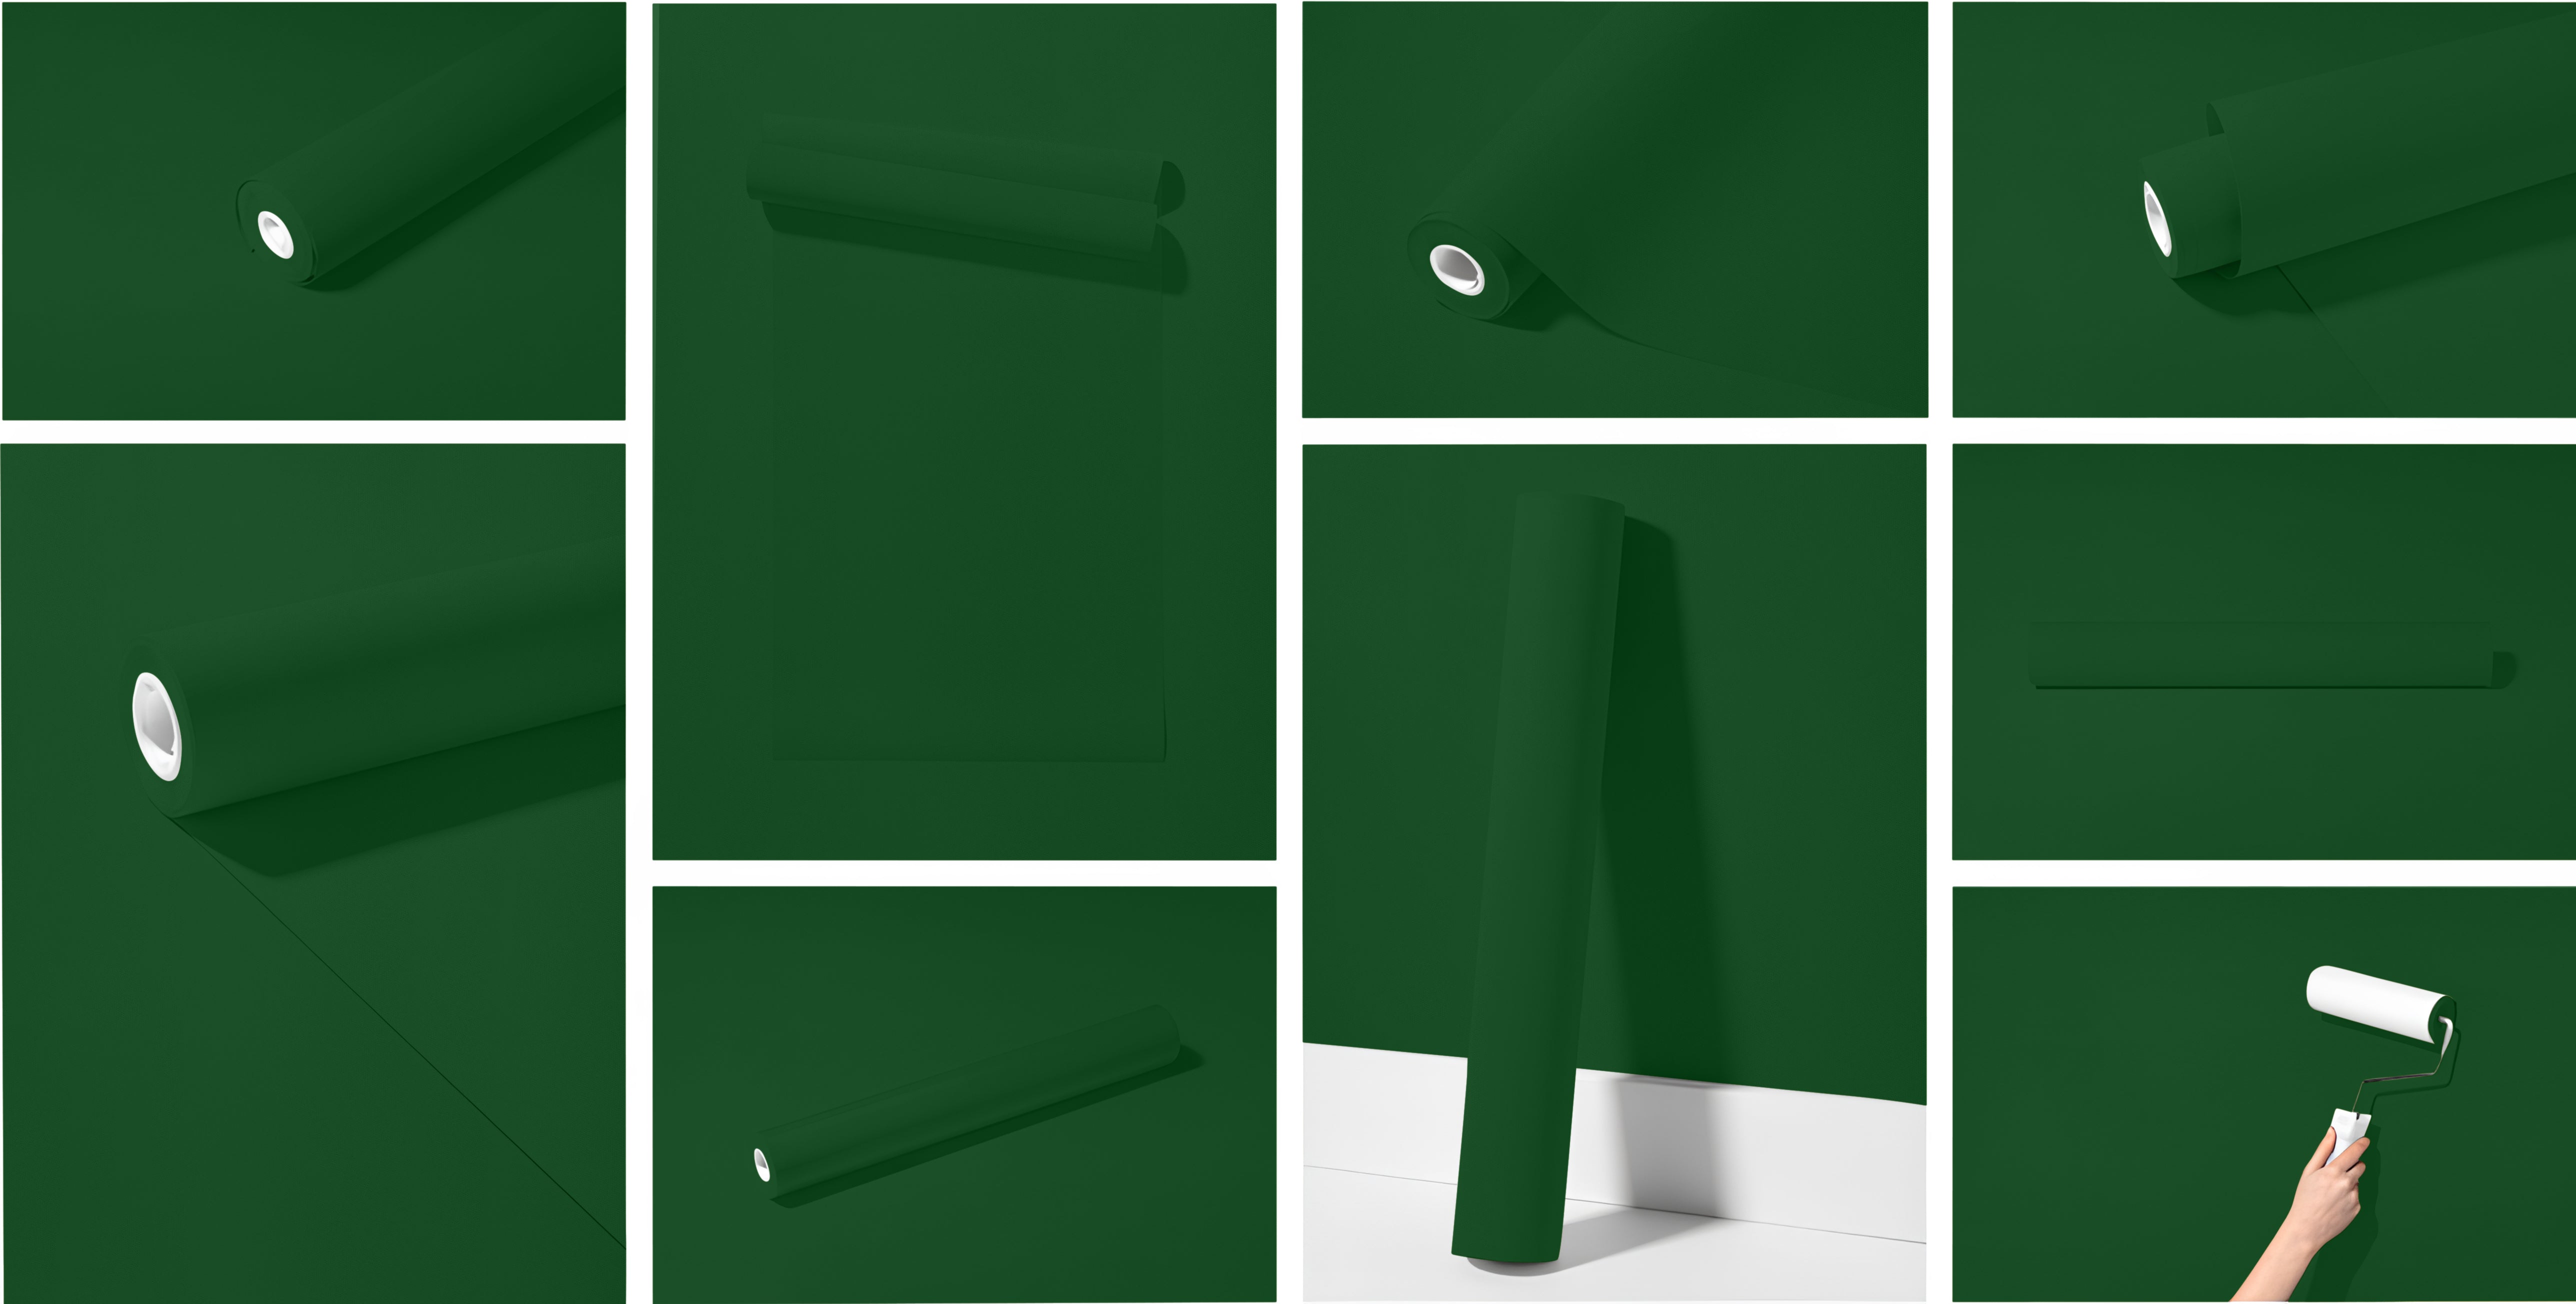 Peel & Stick Removable Re-usable Paint - Color RAL 6035 Pearl Green - offRAL™ - RALRAW LLC, USA